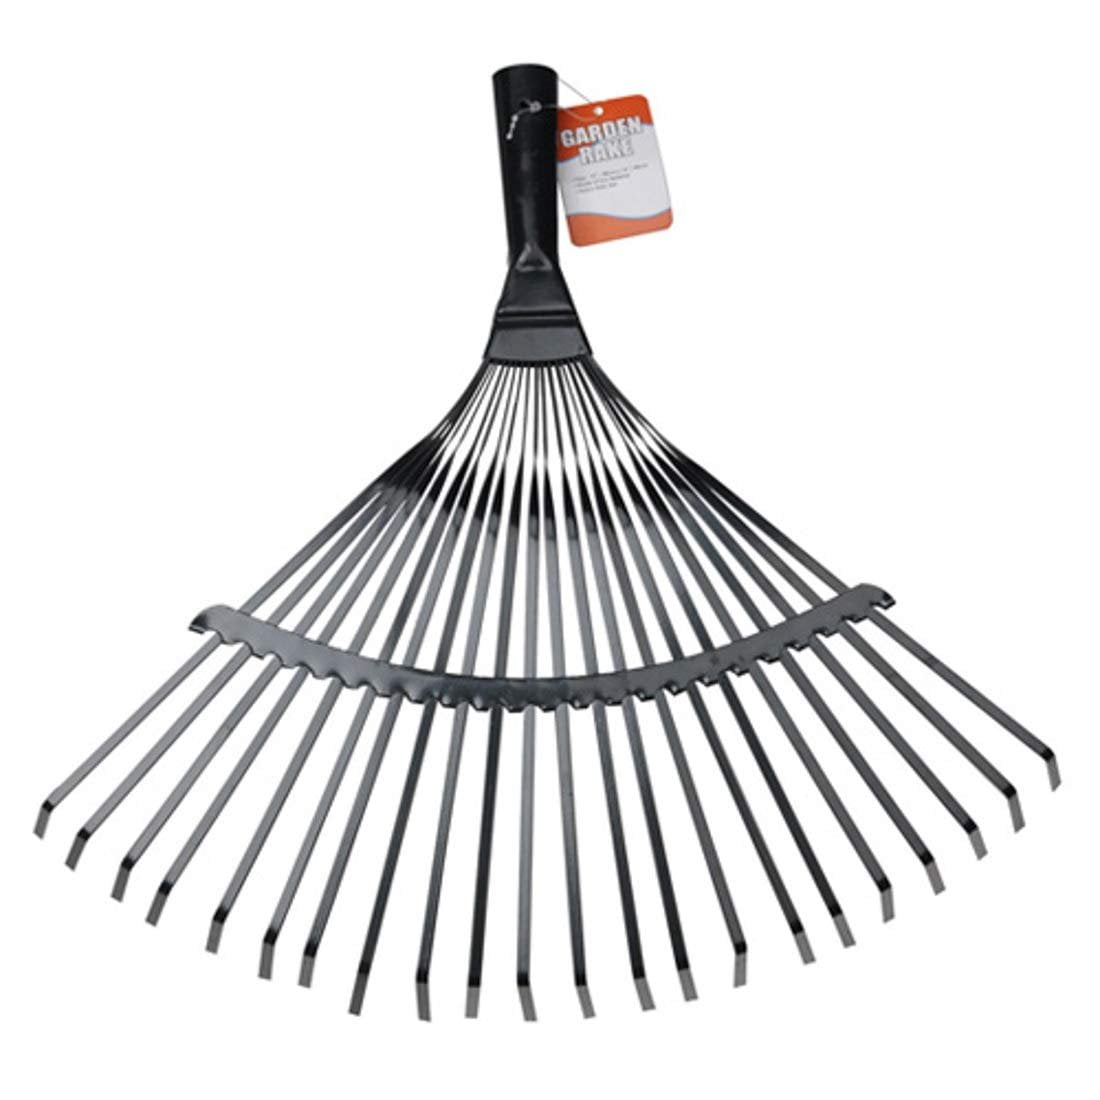 Plastic Rake Garden Bow Rake Plastic Handle Landscape Cultivator Gardening Tool Leveling Mulch peat Moss and Loose Heavy soils Long Handle Sweep Fall Leaves No Bending Easy Grip 